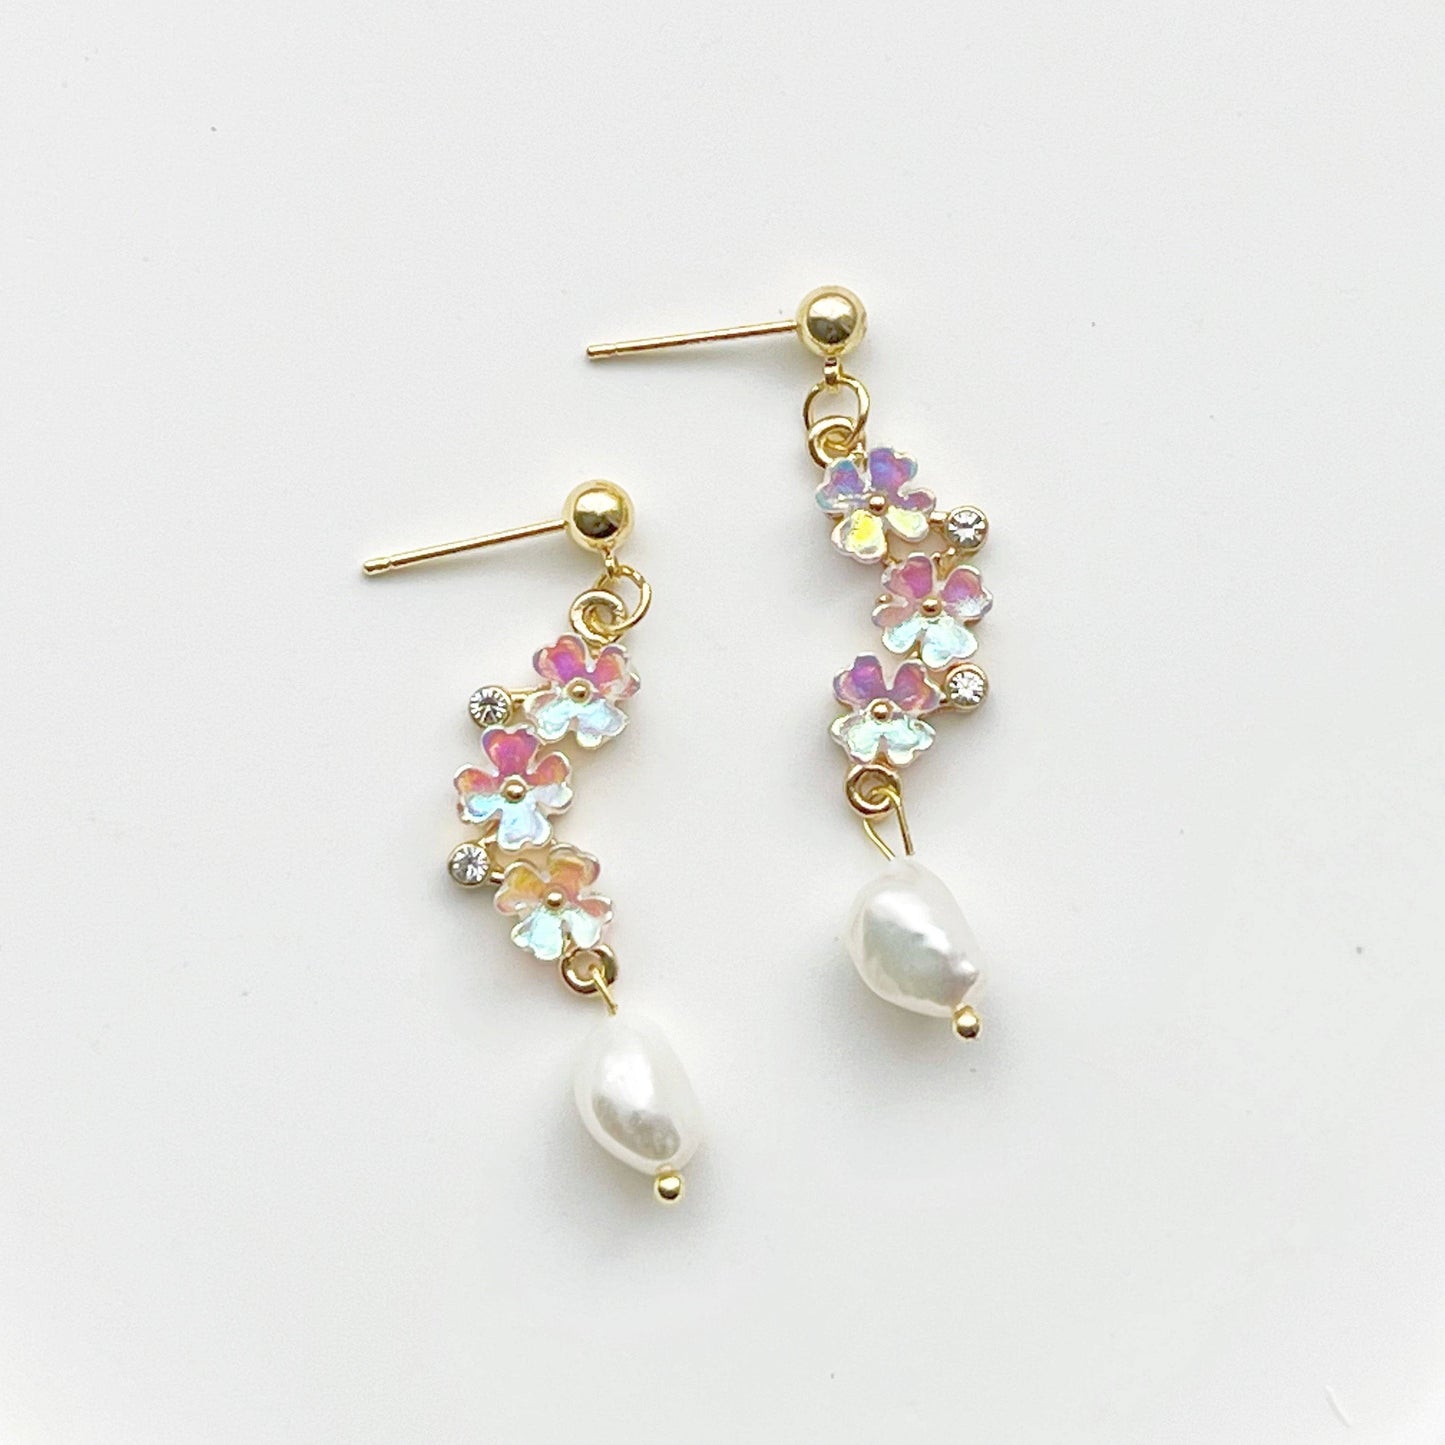 Triple Flowers with Pearl Drop Earrings - Cherry Blomson with Pearl Drop-Ninaouity